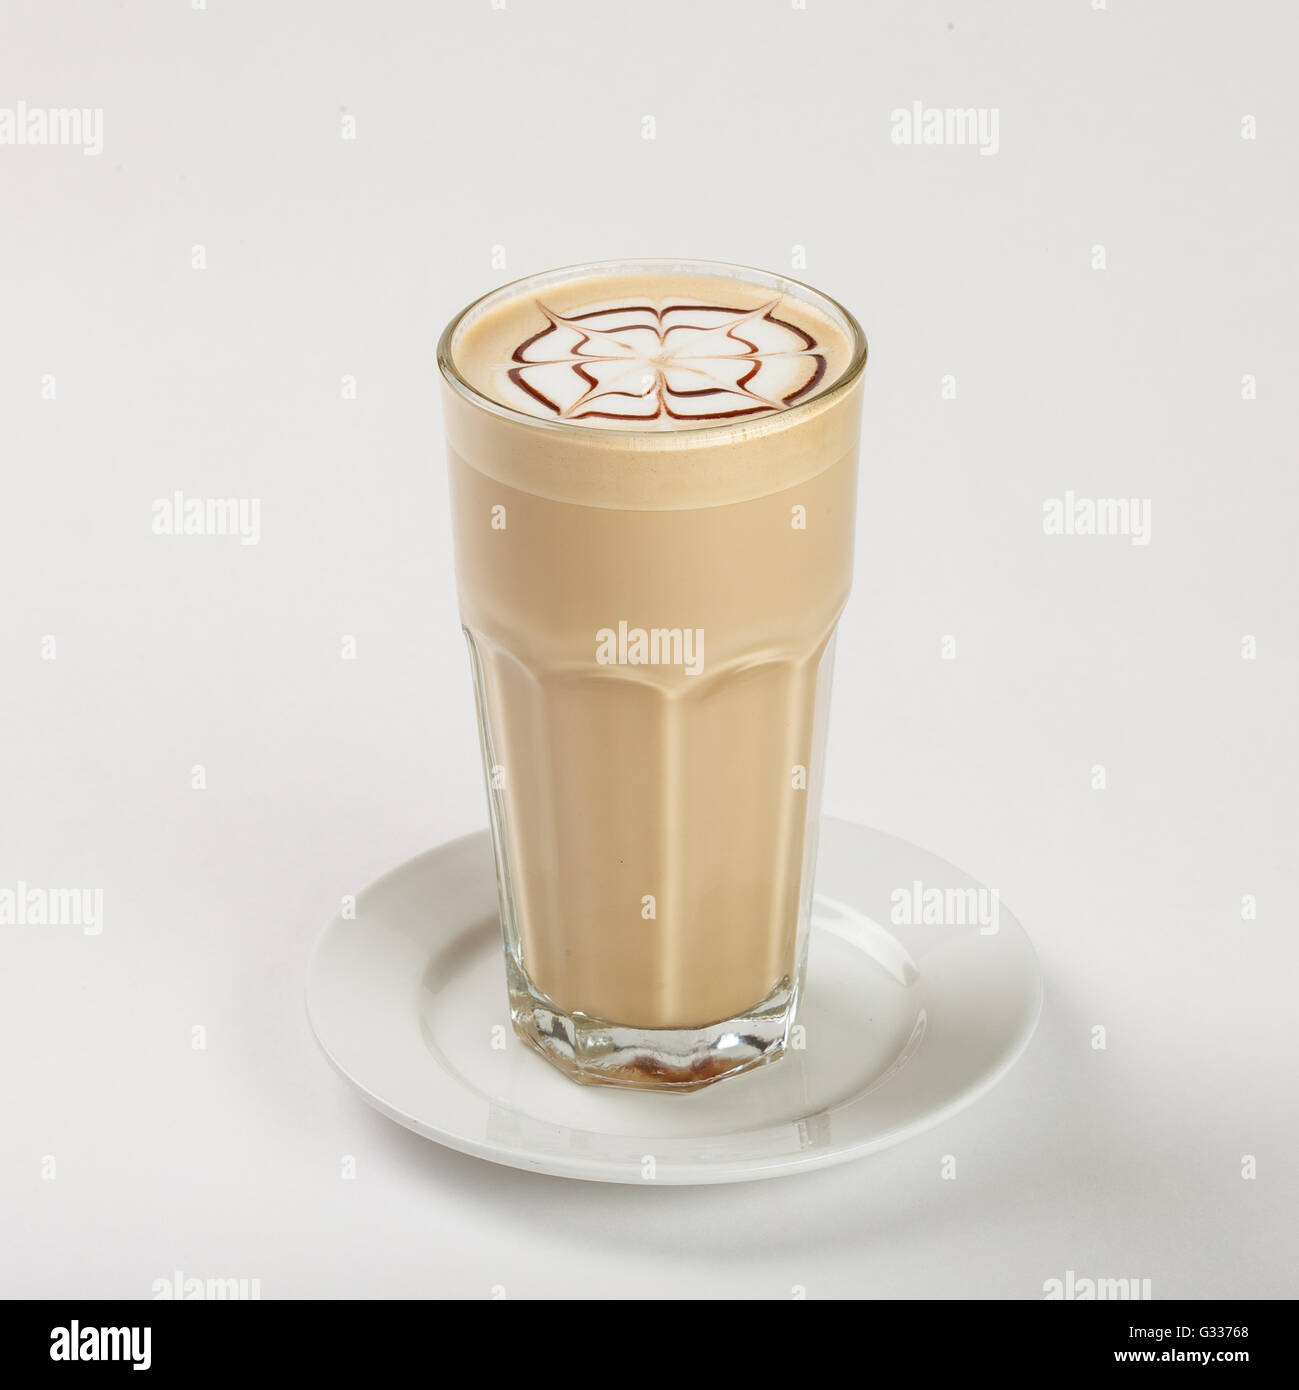 Delicious latte in a tall glass on the plate on white background. Close up side view. Stock Photo